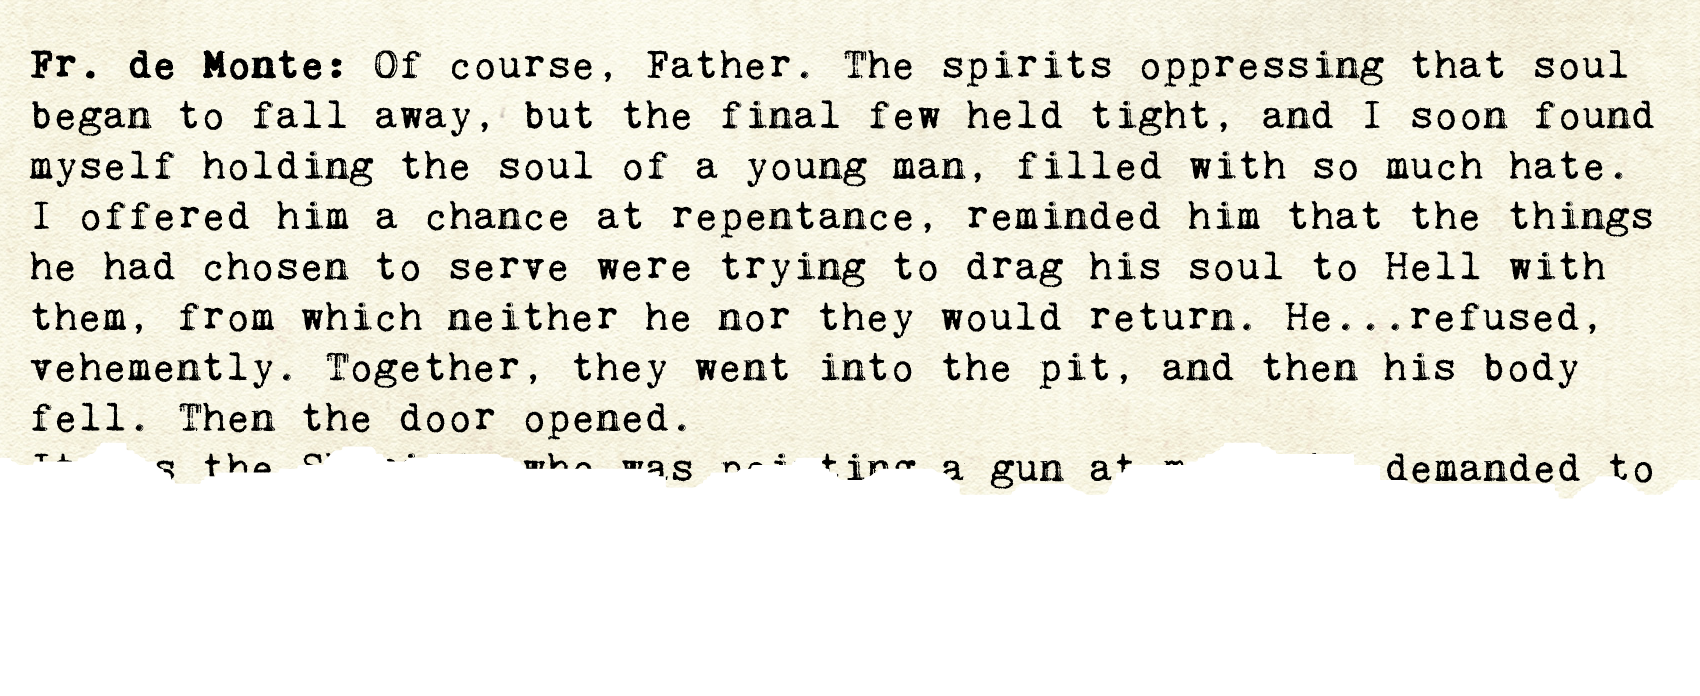 Another yellowed page that reads as follows. Fr. de Monte: Of course, Father. The spirits oppressing that soul began to fall away, but the final few held tight, and I soon found myself holding the soul of a young man, filled with so much hate.  I offered him a chance at repentance, reminded him that the things he had chosen to serve were trying to drag his soul to Hell with them, from which neither he nor they would return. He...refused, vehemently. Together, they went into the pit, and then his body fell. Then the door opened. Here the page is torn off, leaving most words unrecognizable except 